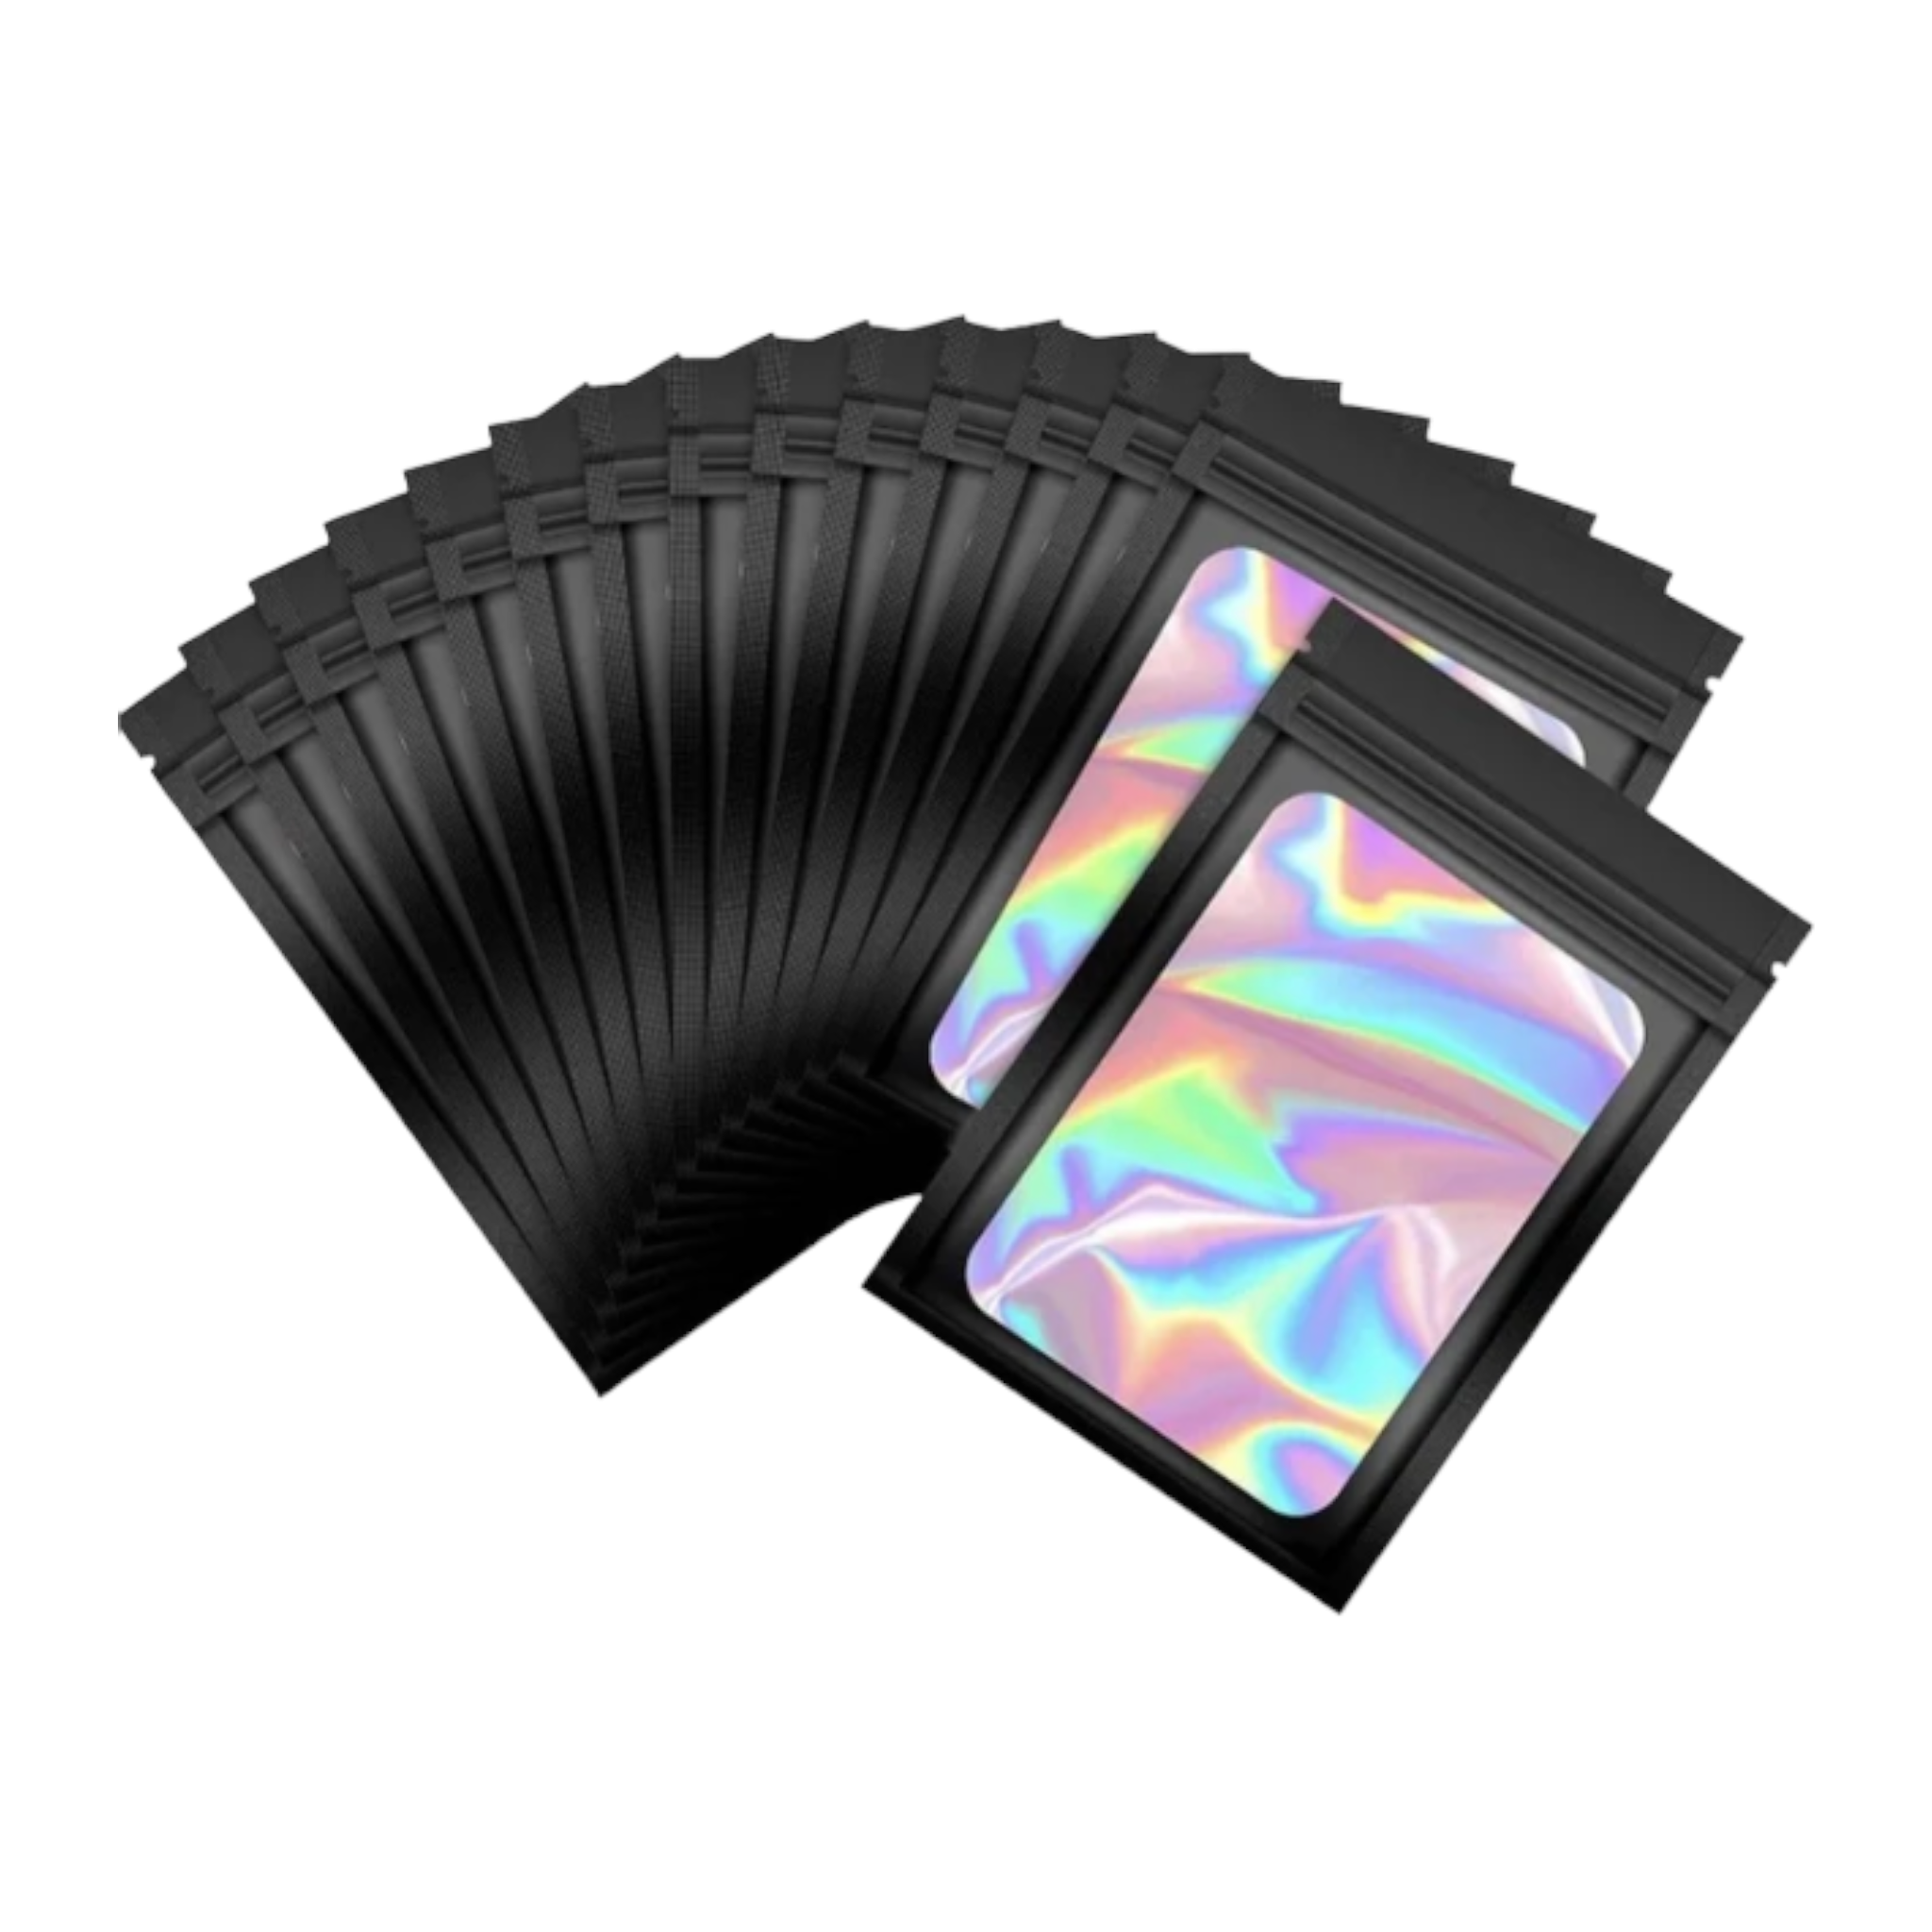 Holographic Resealable Bags 20x30cm Clear Window 10pack